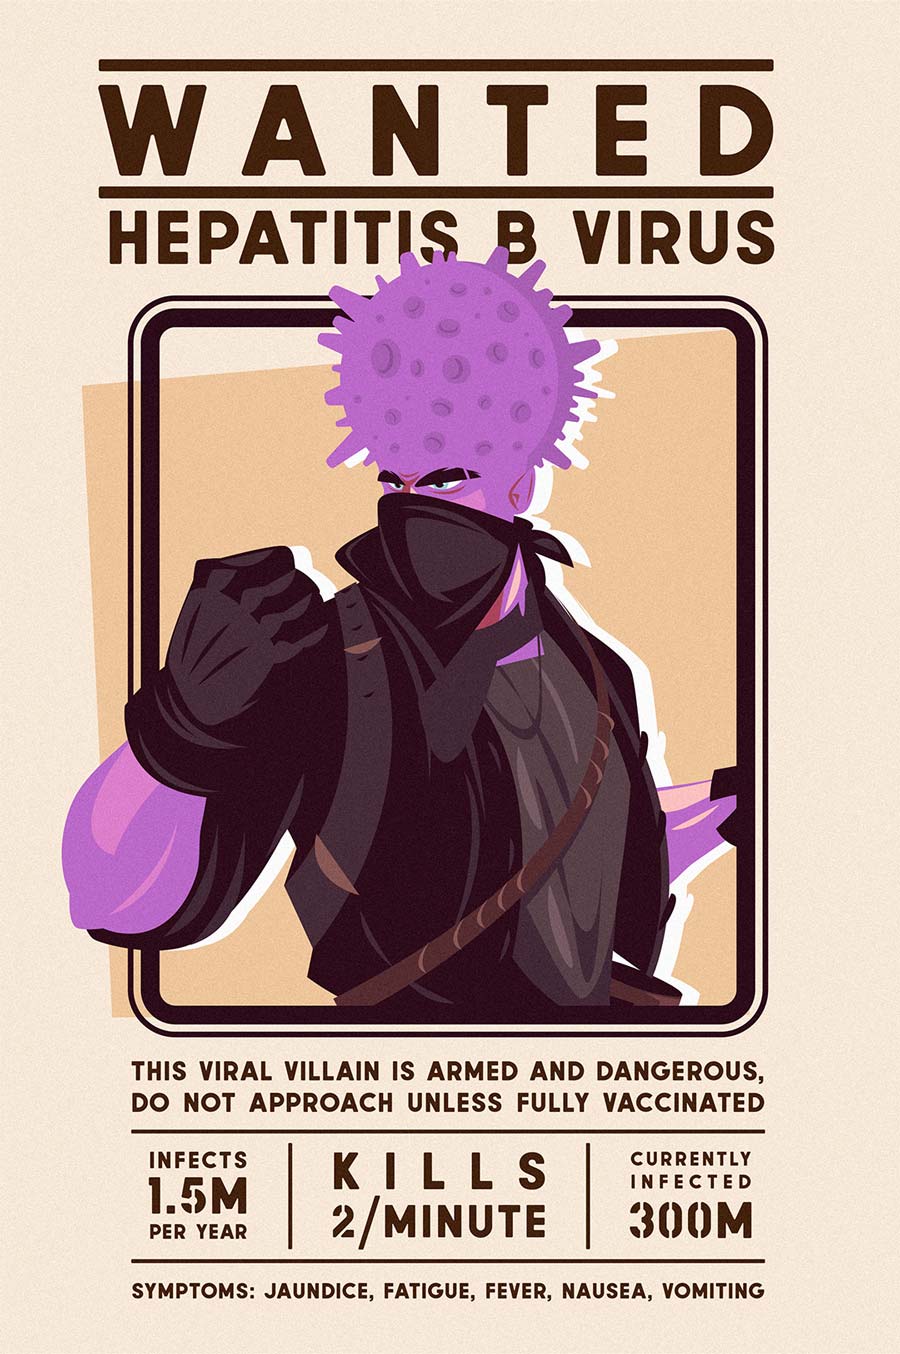 As far as viral villains go, hepatitis B virus (HBV) is among the most wanted - claiming the lives of over 800,000 people each year.